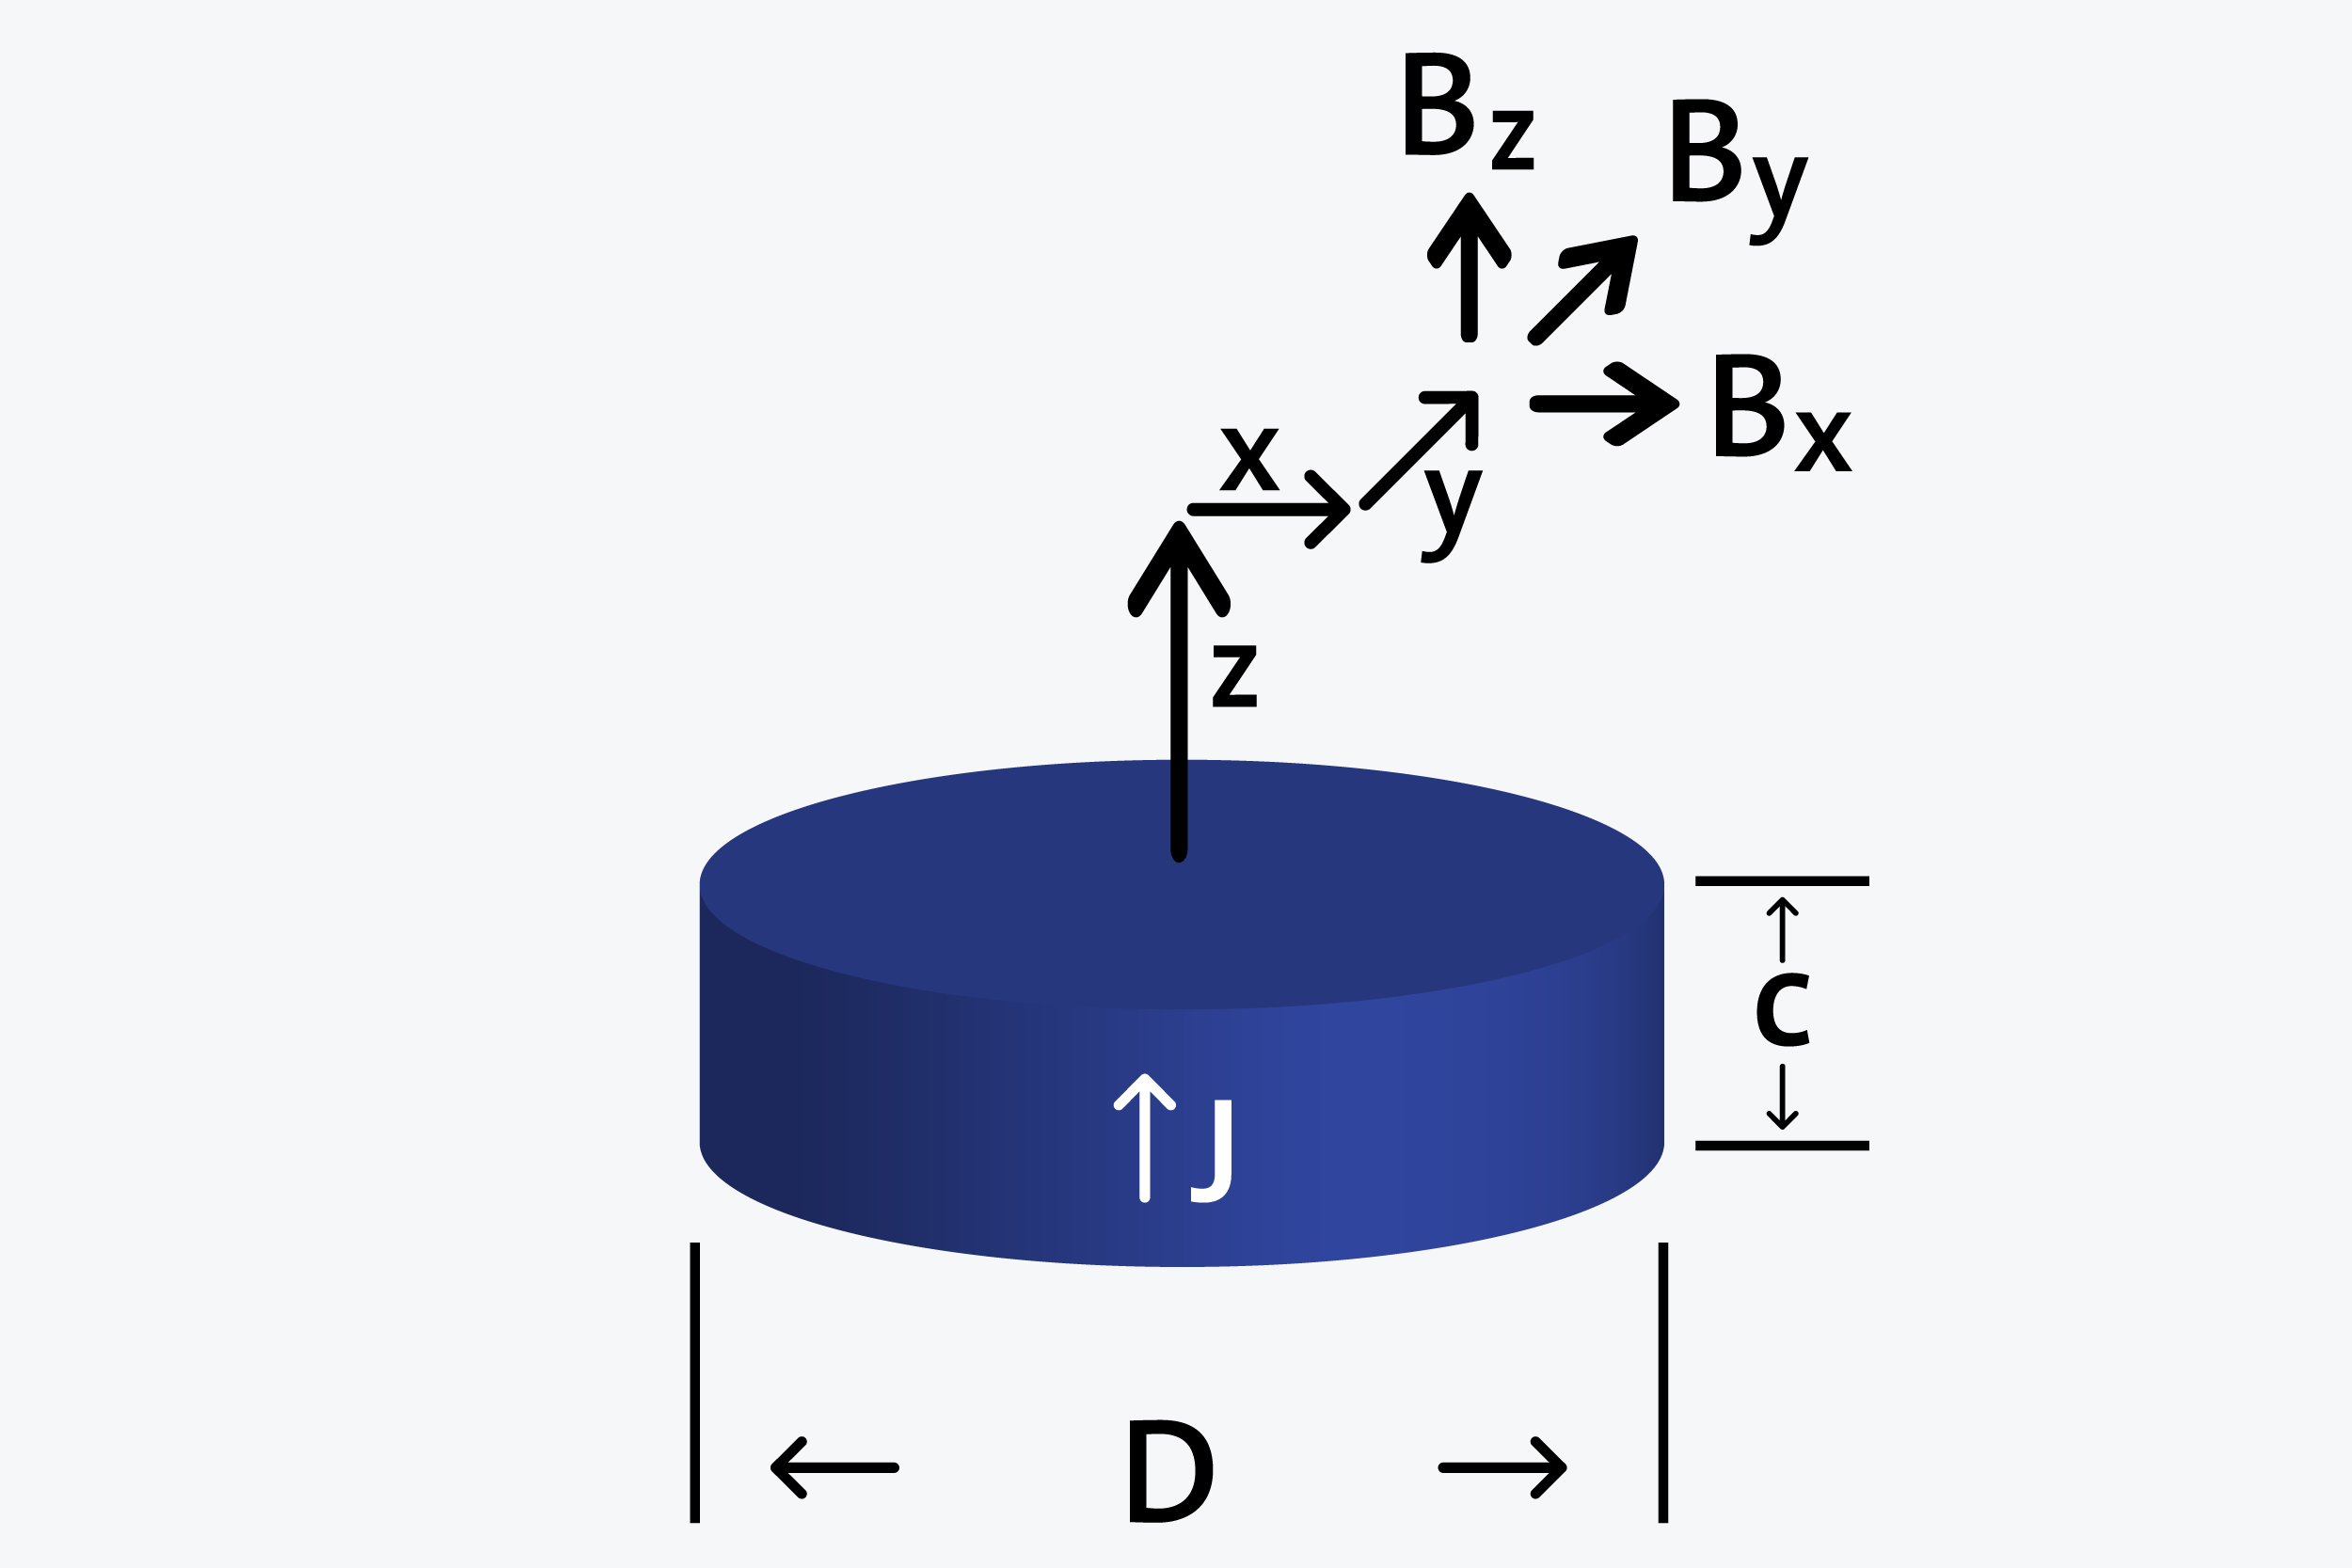 Disk - Axially magnetized